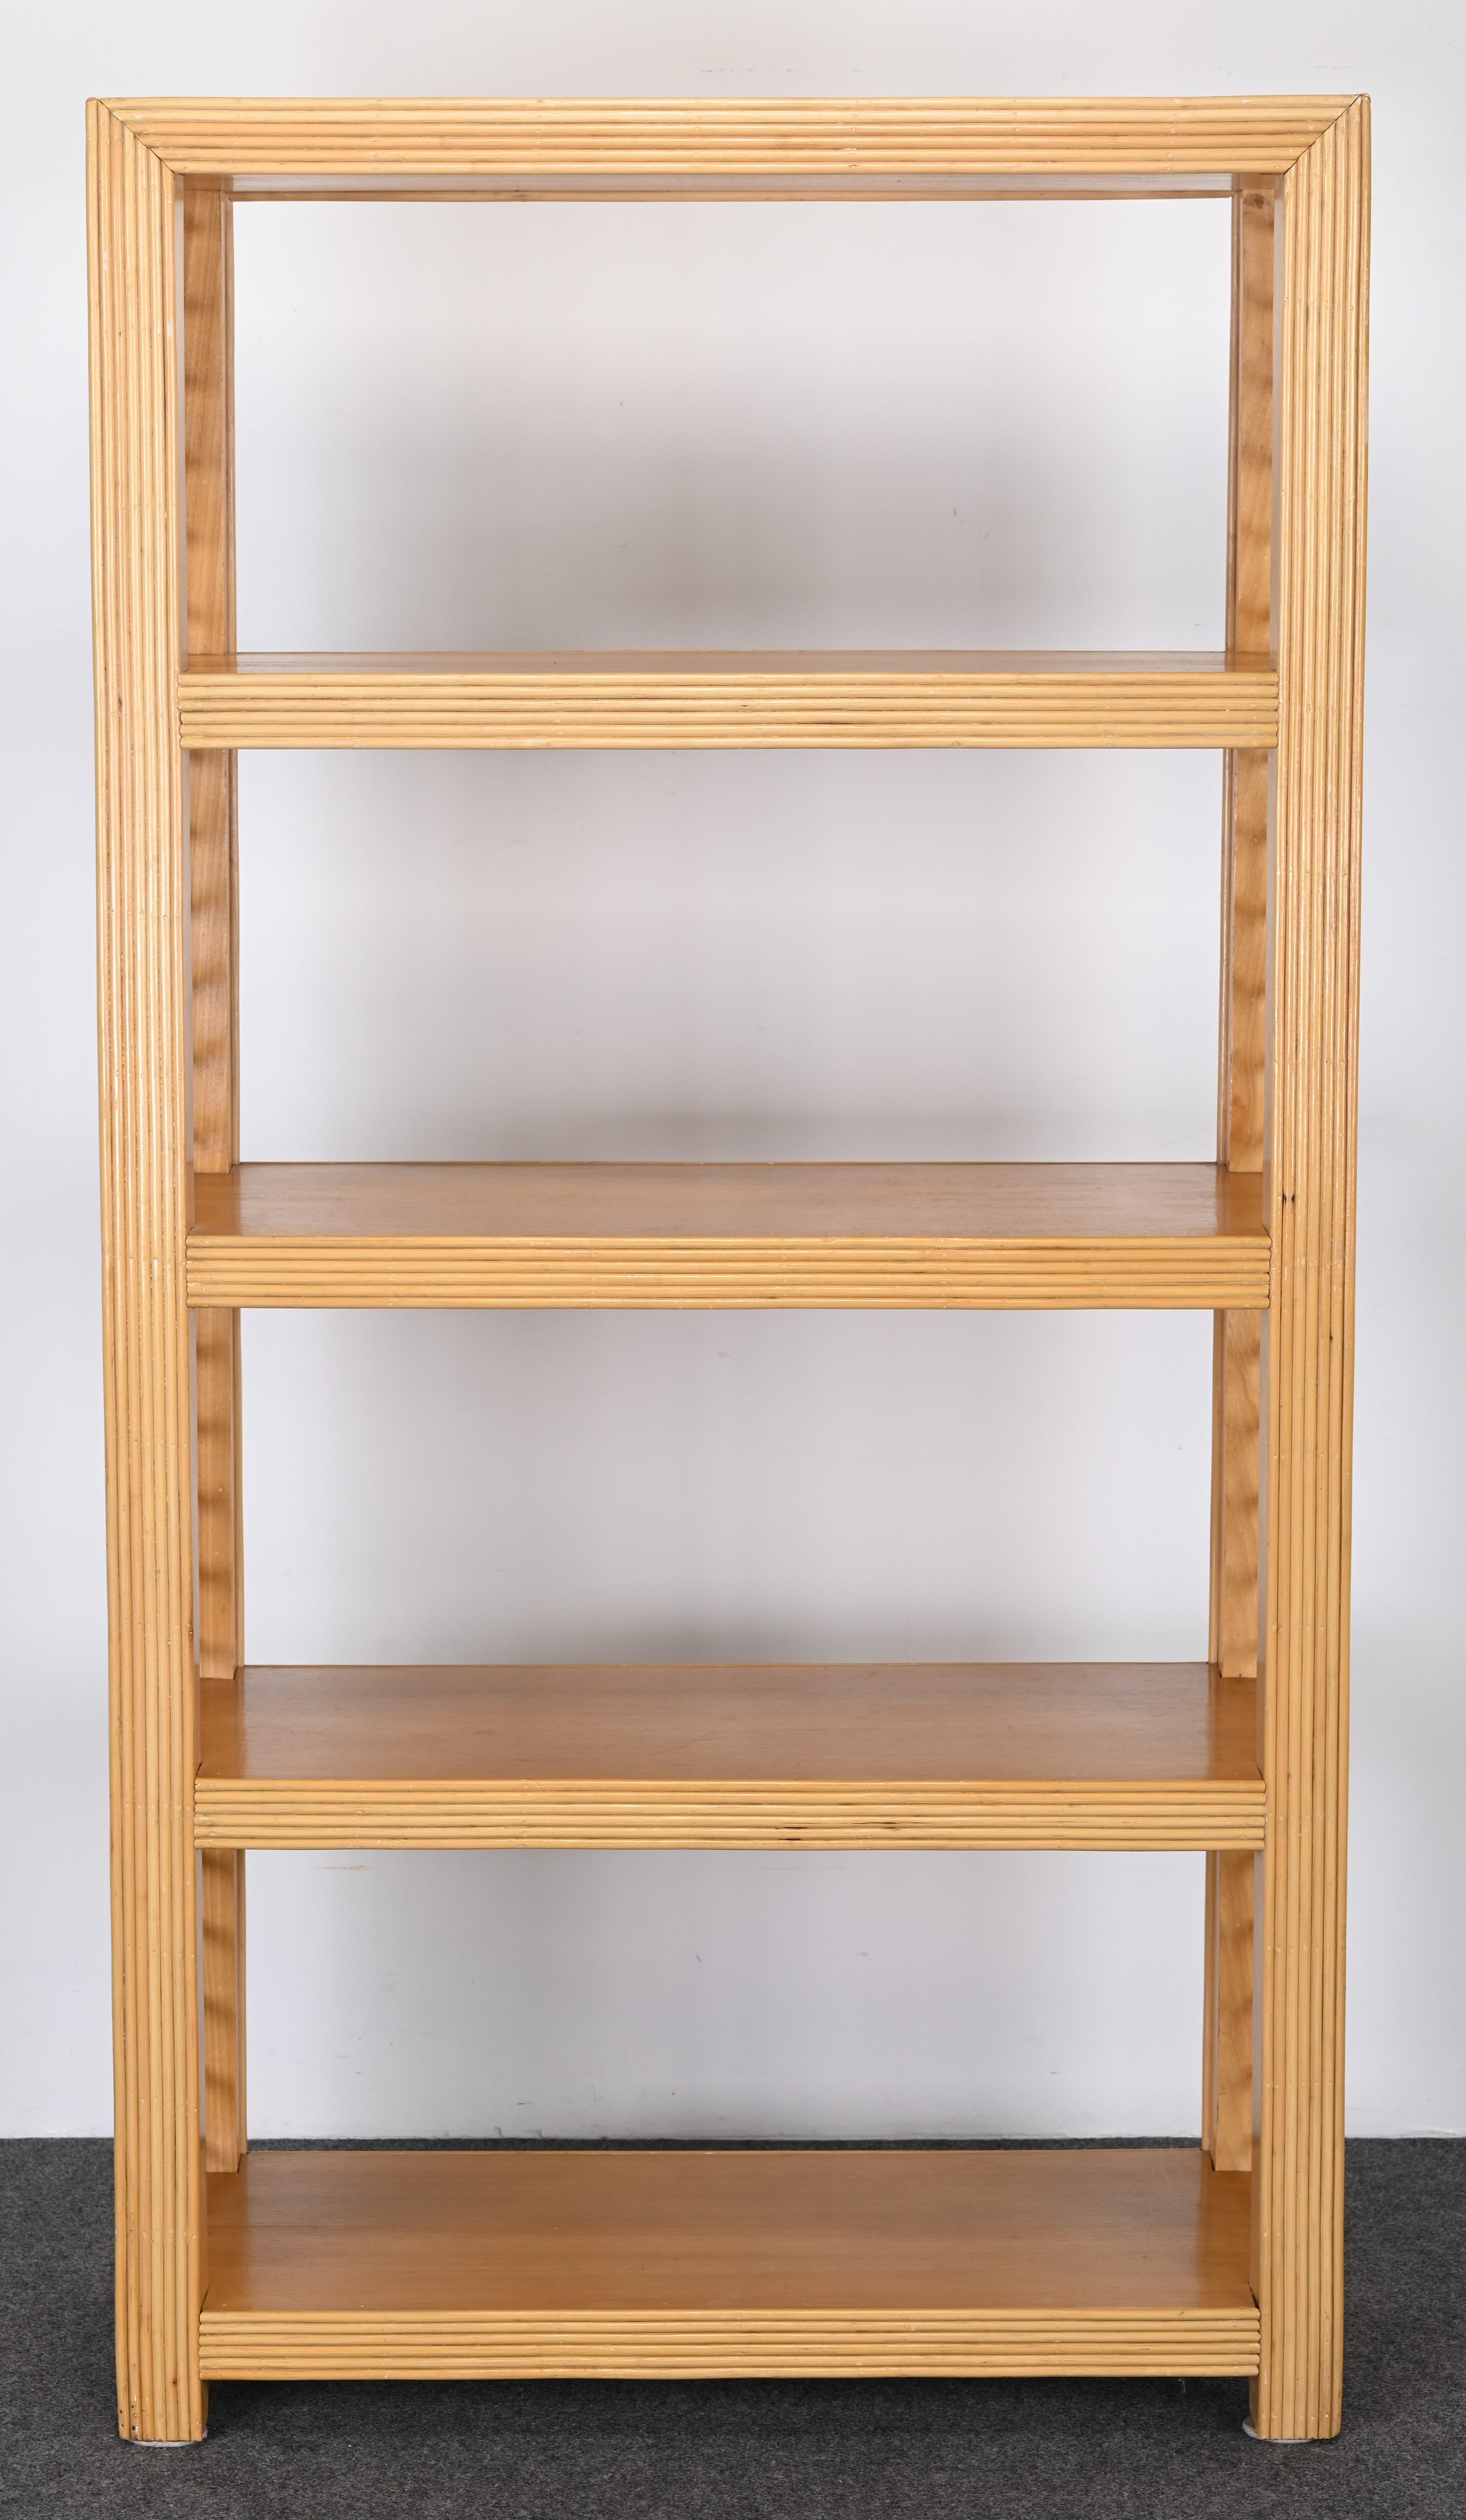 An organic modern rattan and wood freestanding shelving unit or bookcase. This beautiful shelf is in the manner of McGuire, however, there are no labels or markings. Very fine details with hand-wrapped windings and reeded rattan accents. This shelf